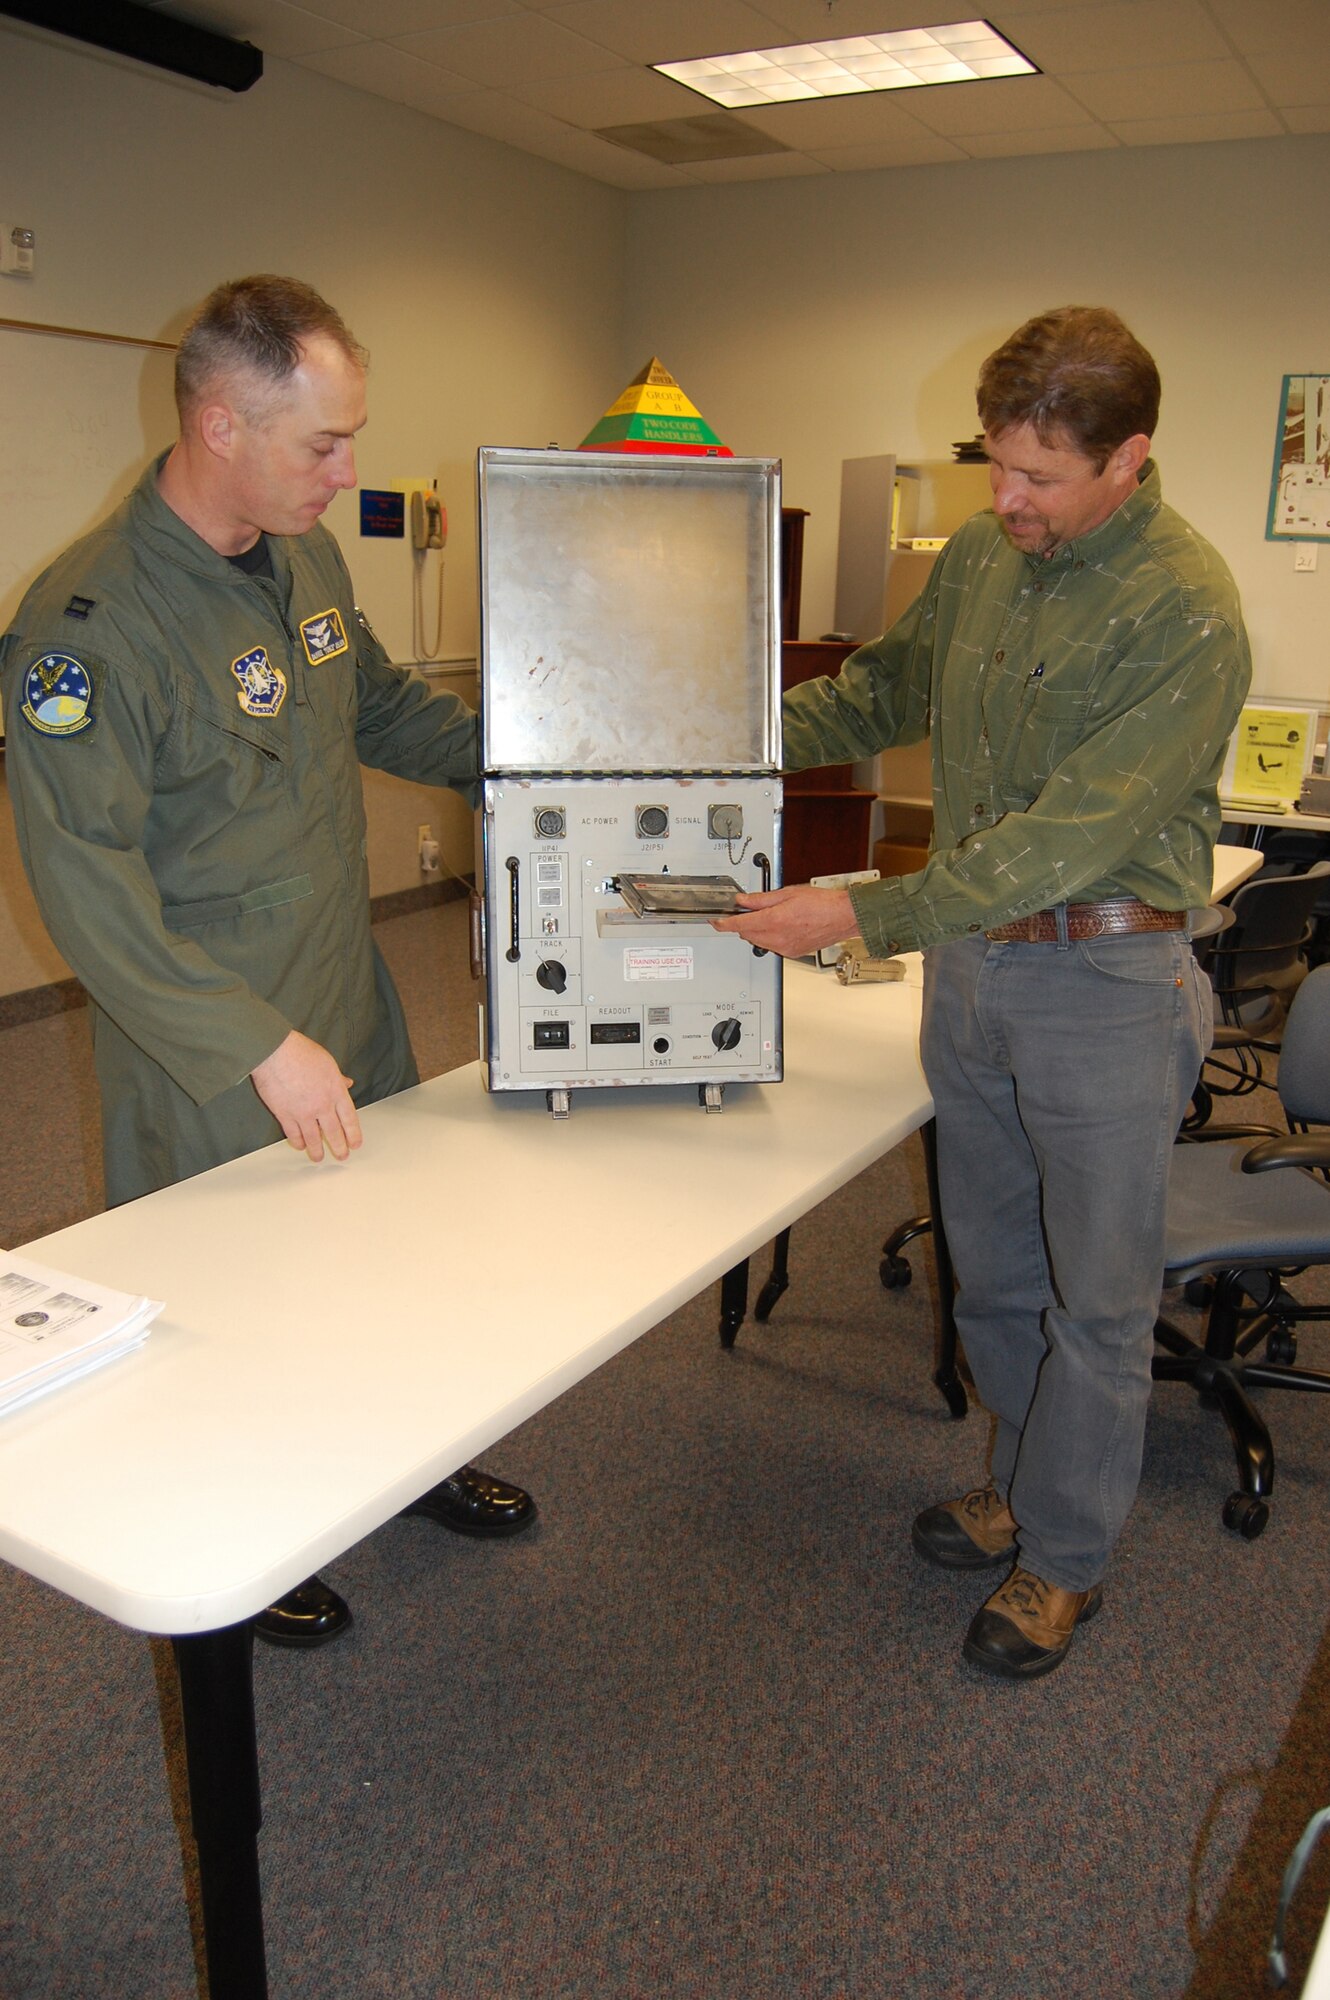 Dave Decker, 341st Operations Support Squadron senior codes instructor, demonstrates how a recording can communicate with an ICBM in the field to transmit information, passwords and lock the weapon until a presidential order is issued, as Capt. Darrel DeLeon, 341st OSS chief of ICBM wing codes operations, looks on. (U.S. Air Force photo/Senior Airman Emerald Ralston)